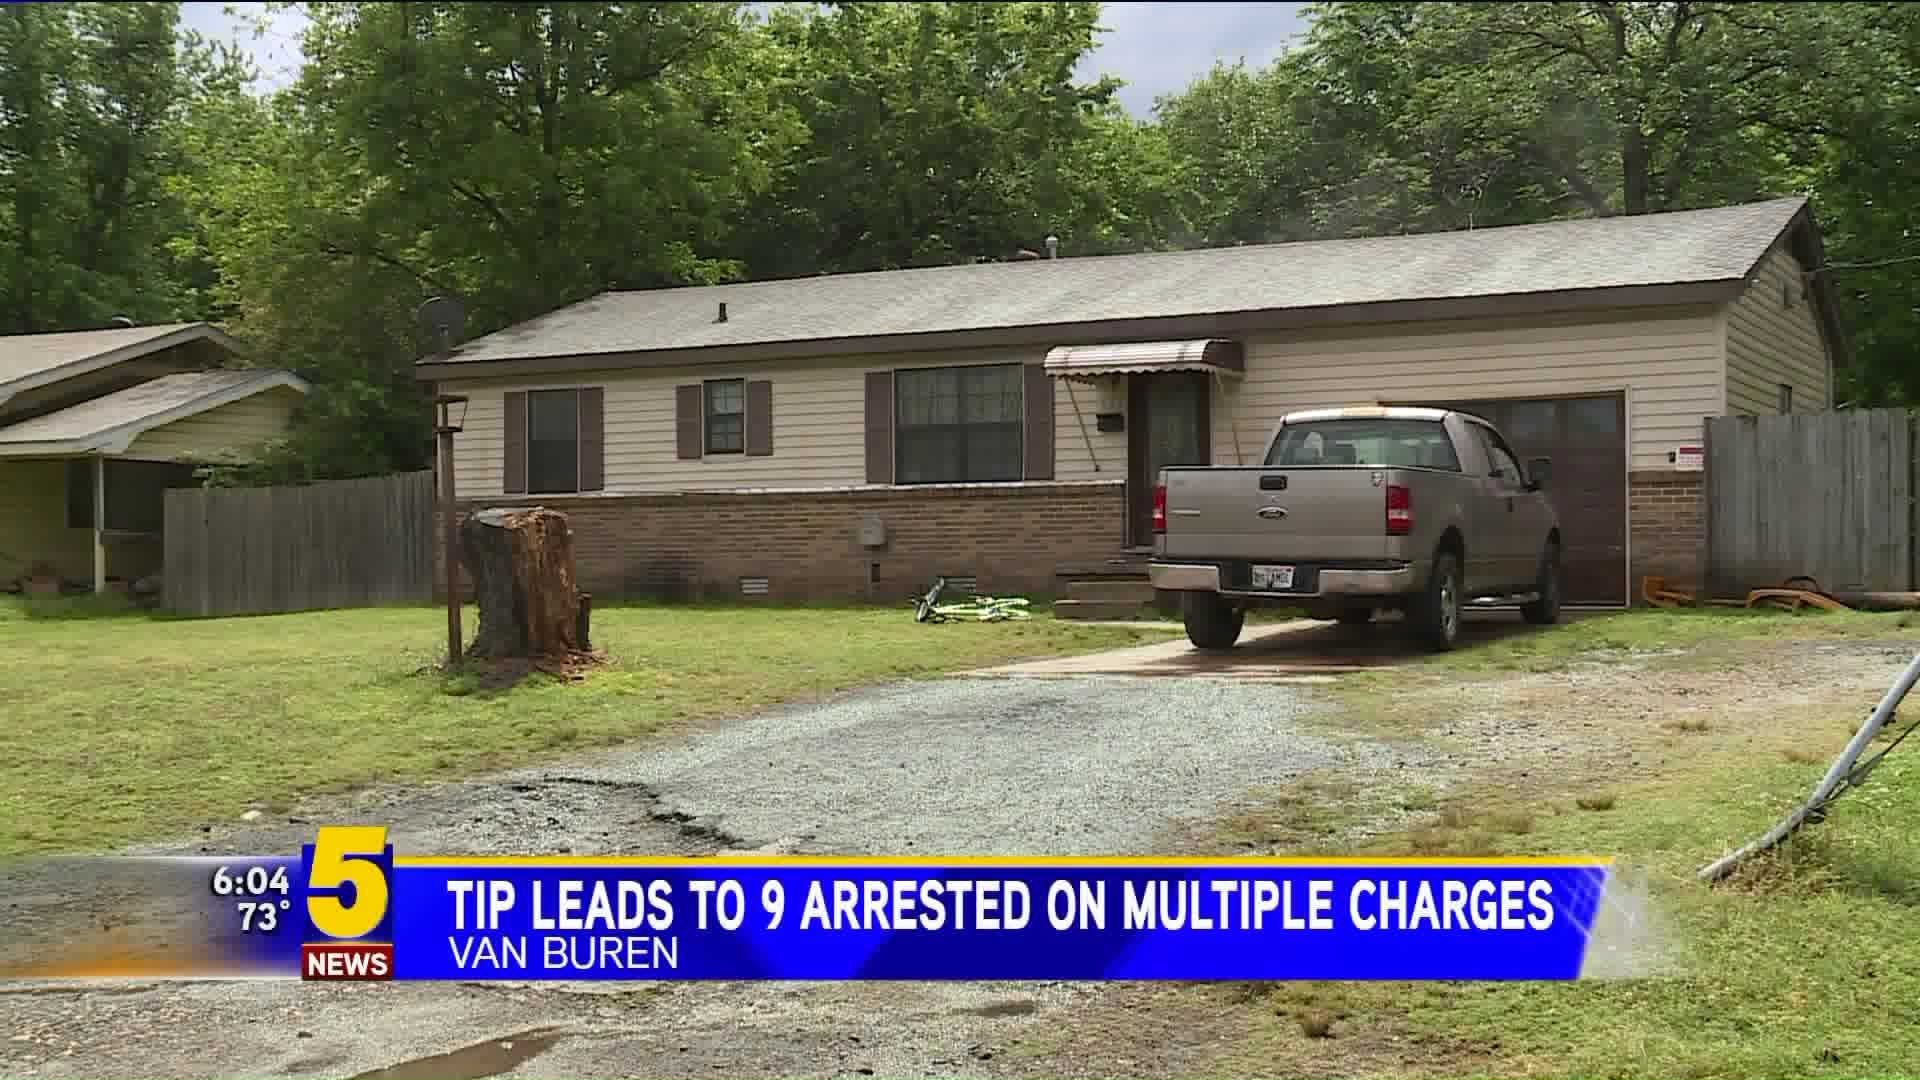 Tip Leads To 9 Arrested On Multiple Charges